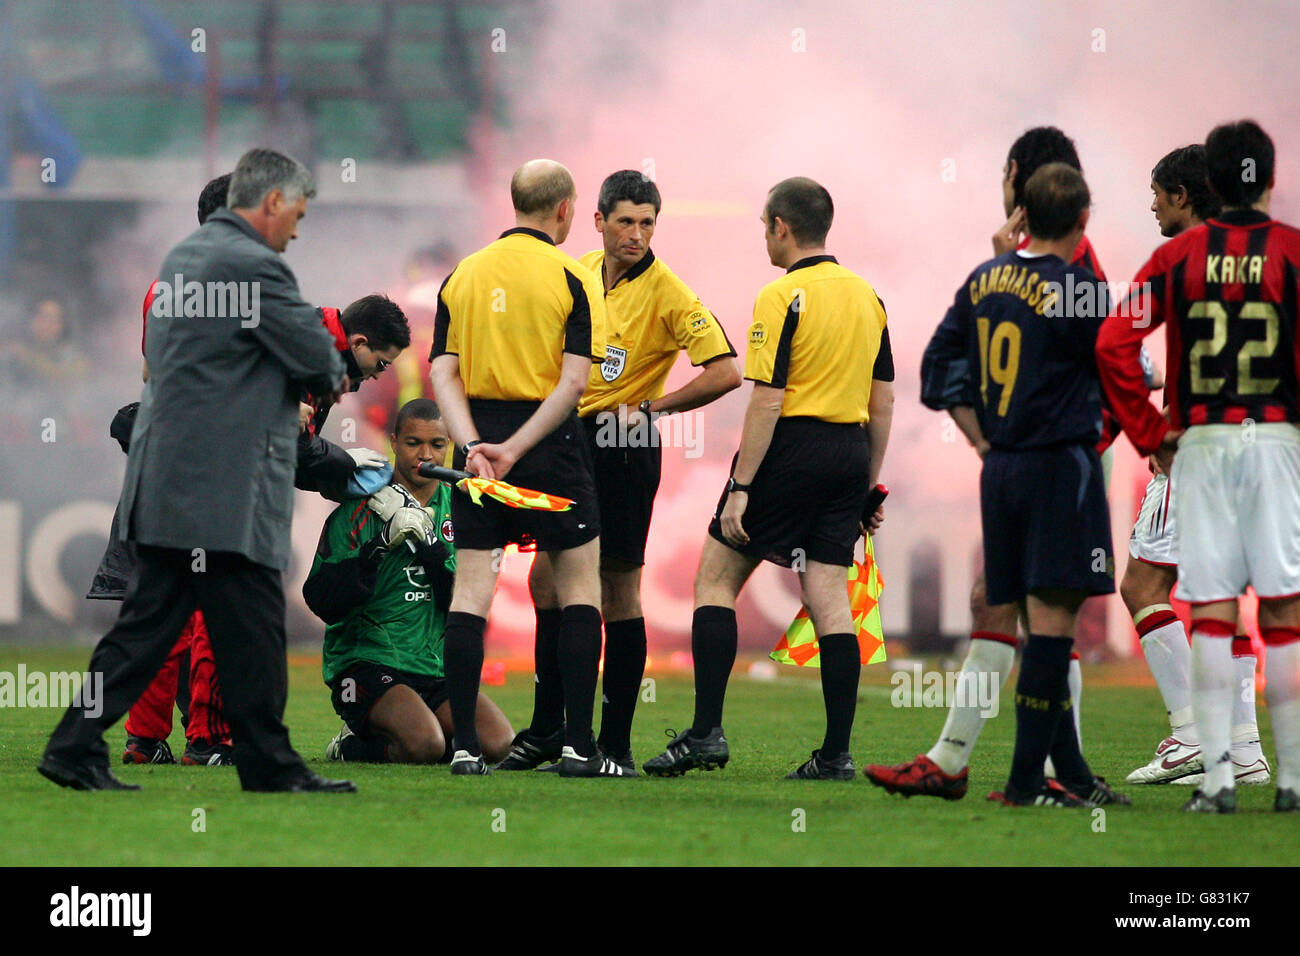 Referee Markus Merk decides to take the players off the field